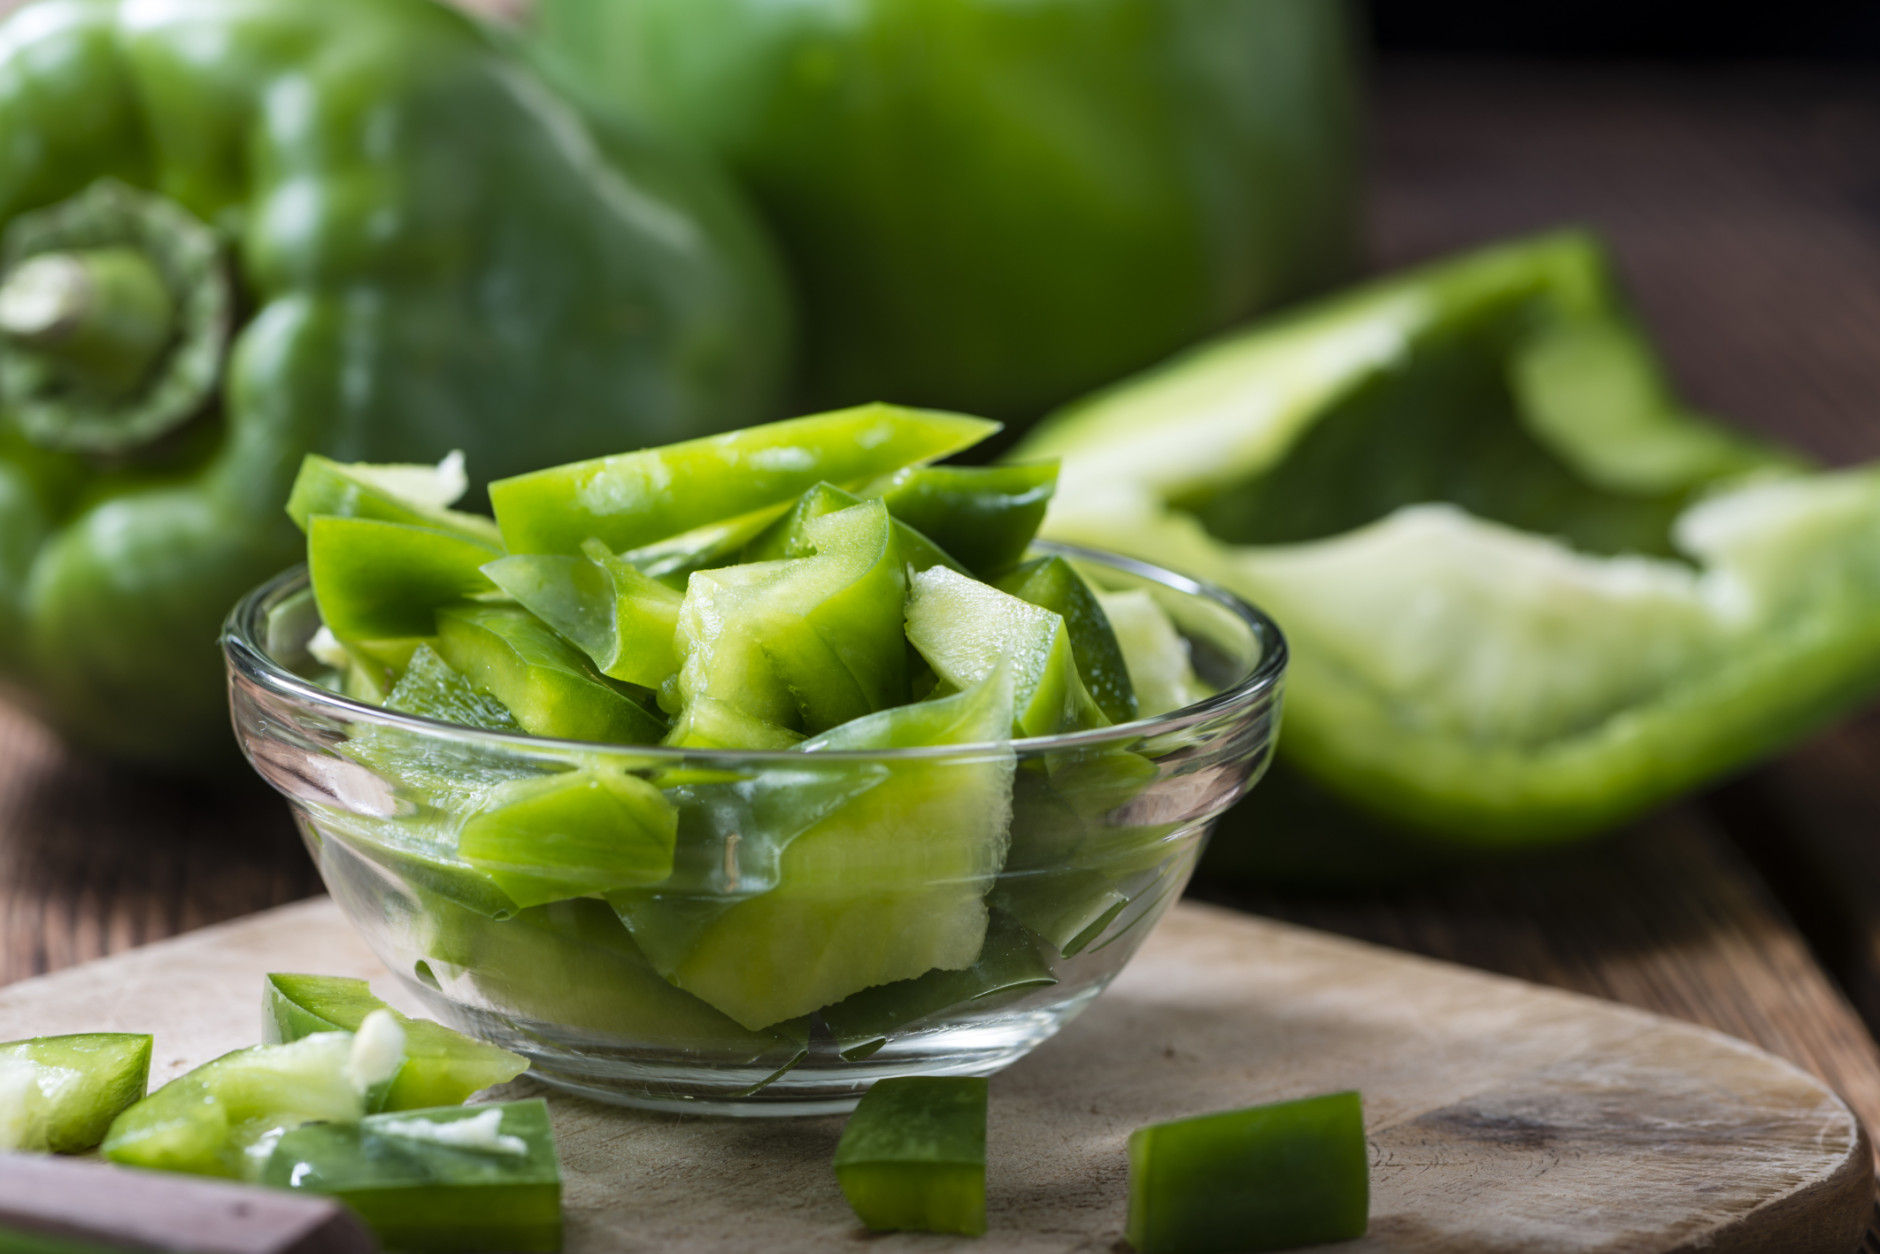 Sliced green Peppers